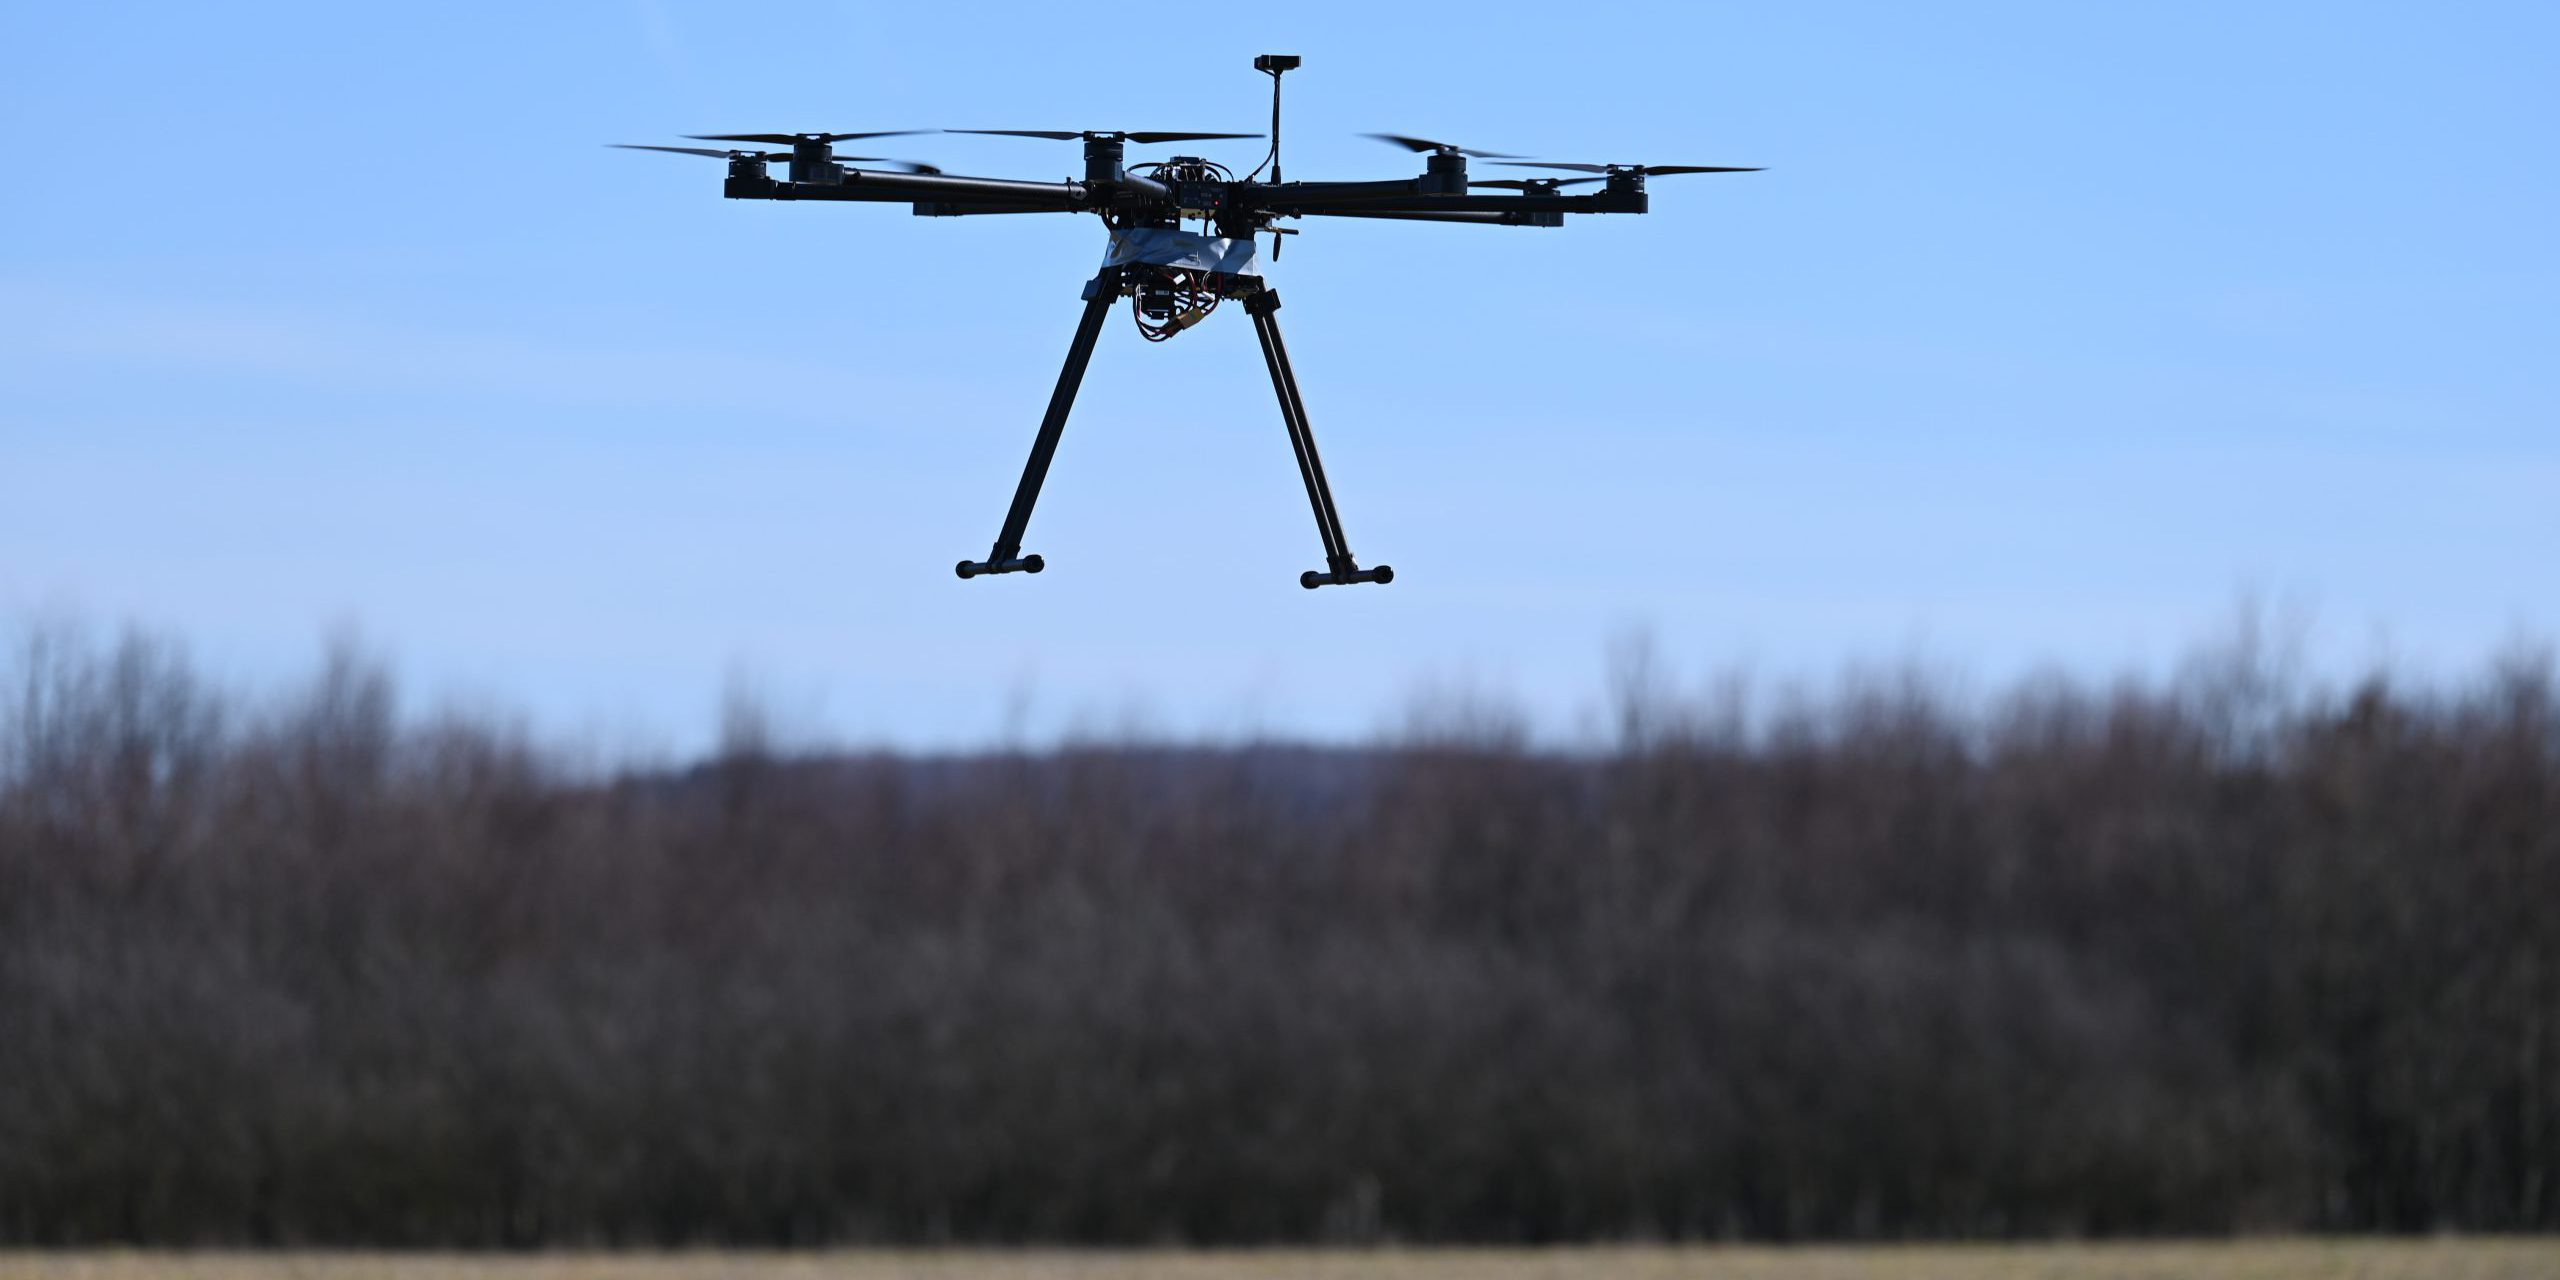 An unmanned aerial system hovers in the air during a Georgia Tech Research Institute flight test in preparation for a Combined Joint All-Domain Command and Control demonstration in a field near Ramstein Air Base, Germany on February 21, 2021. U.S. Air Forces in Europe conducted a CJADC2 demonstration to highlight the Force’s ability to integrate network solutions and connect multiple sensors to a common operating network, presenting Warfighters with an information advantage across all Warfighting domains (U.S. Air Force photo by Tech. Sgt. Christopher Ruano).